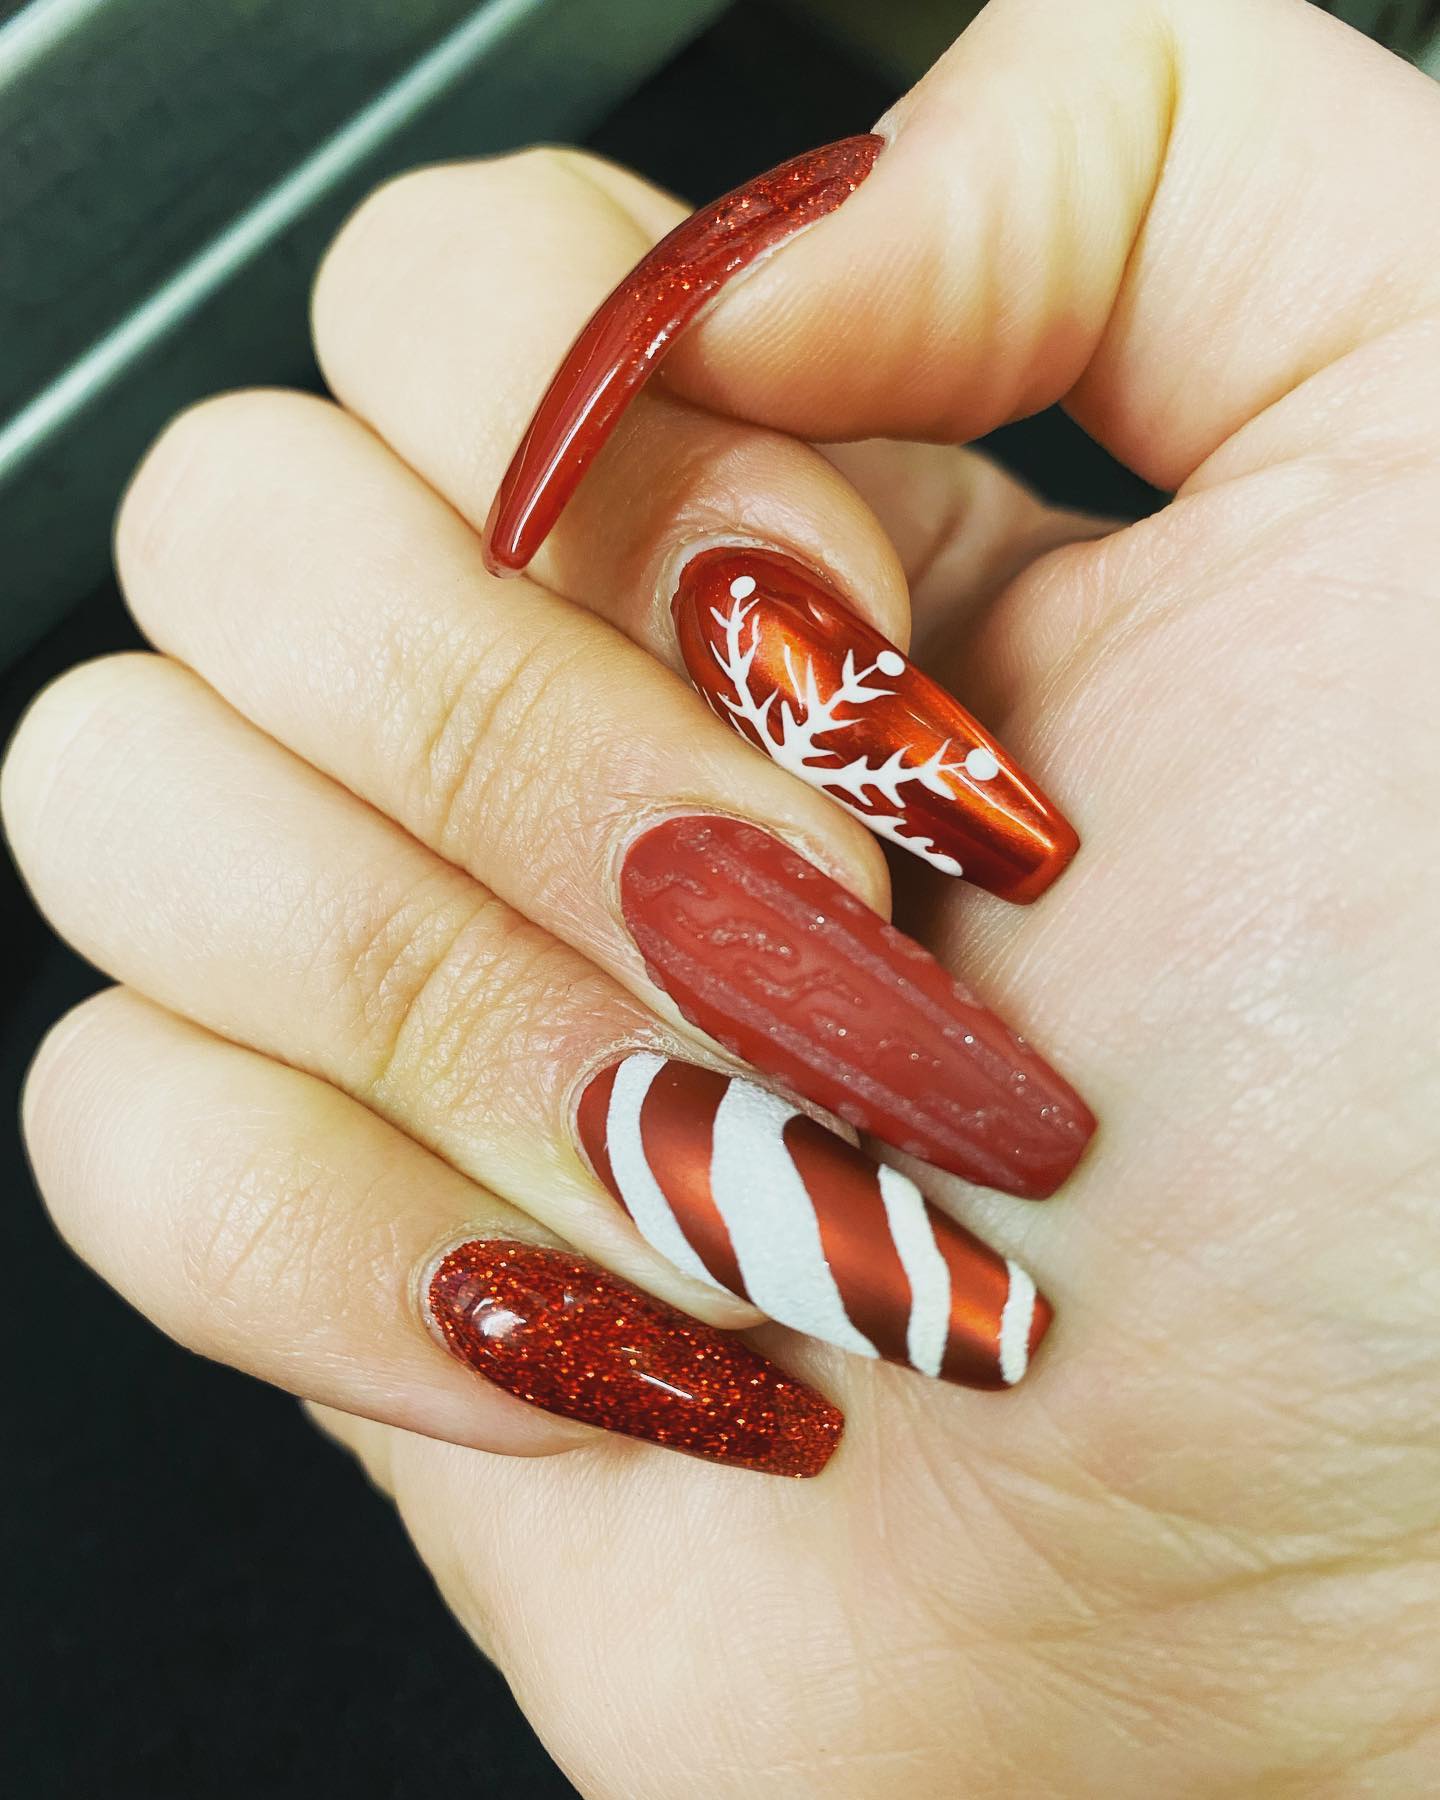 If plain red nails are not for you, the nail design above is for you. You can design all of your fingers with different nail arts.